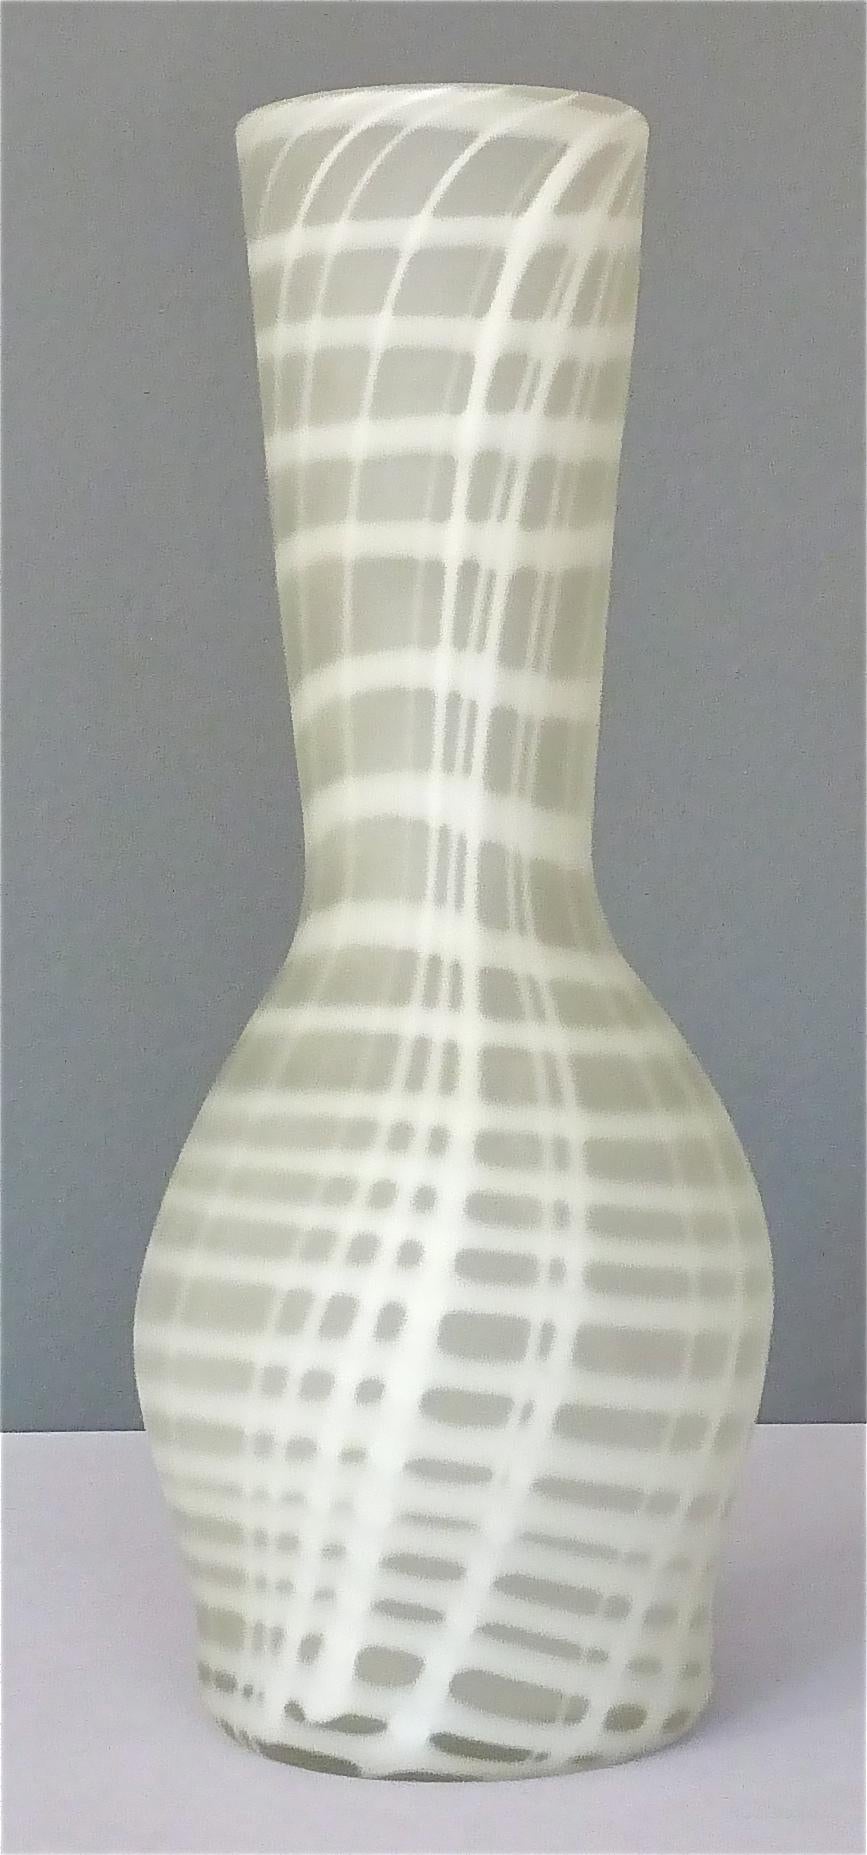 A large and beautiful handcrafted Murano art glass vase by Maestro Giuliano Tosi, Italy, circa 1970. The quality of the art glass vase is comparable to Venini and Barovier. Opaque white internally composed vertical and horizontal glass stripes with